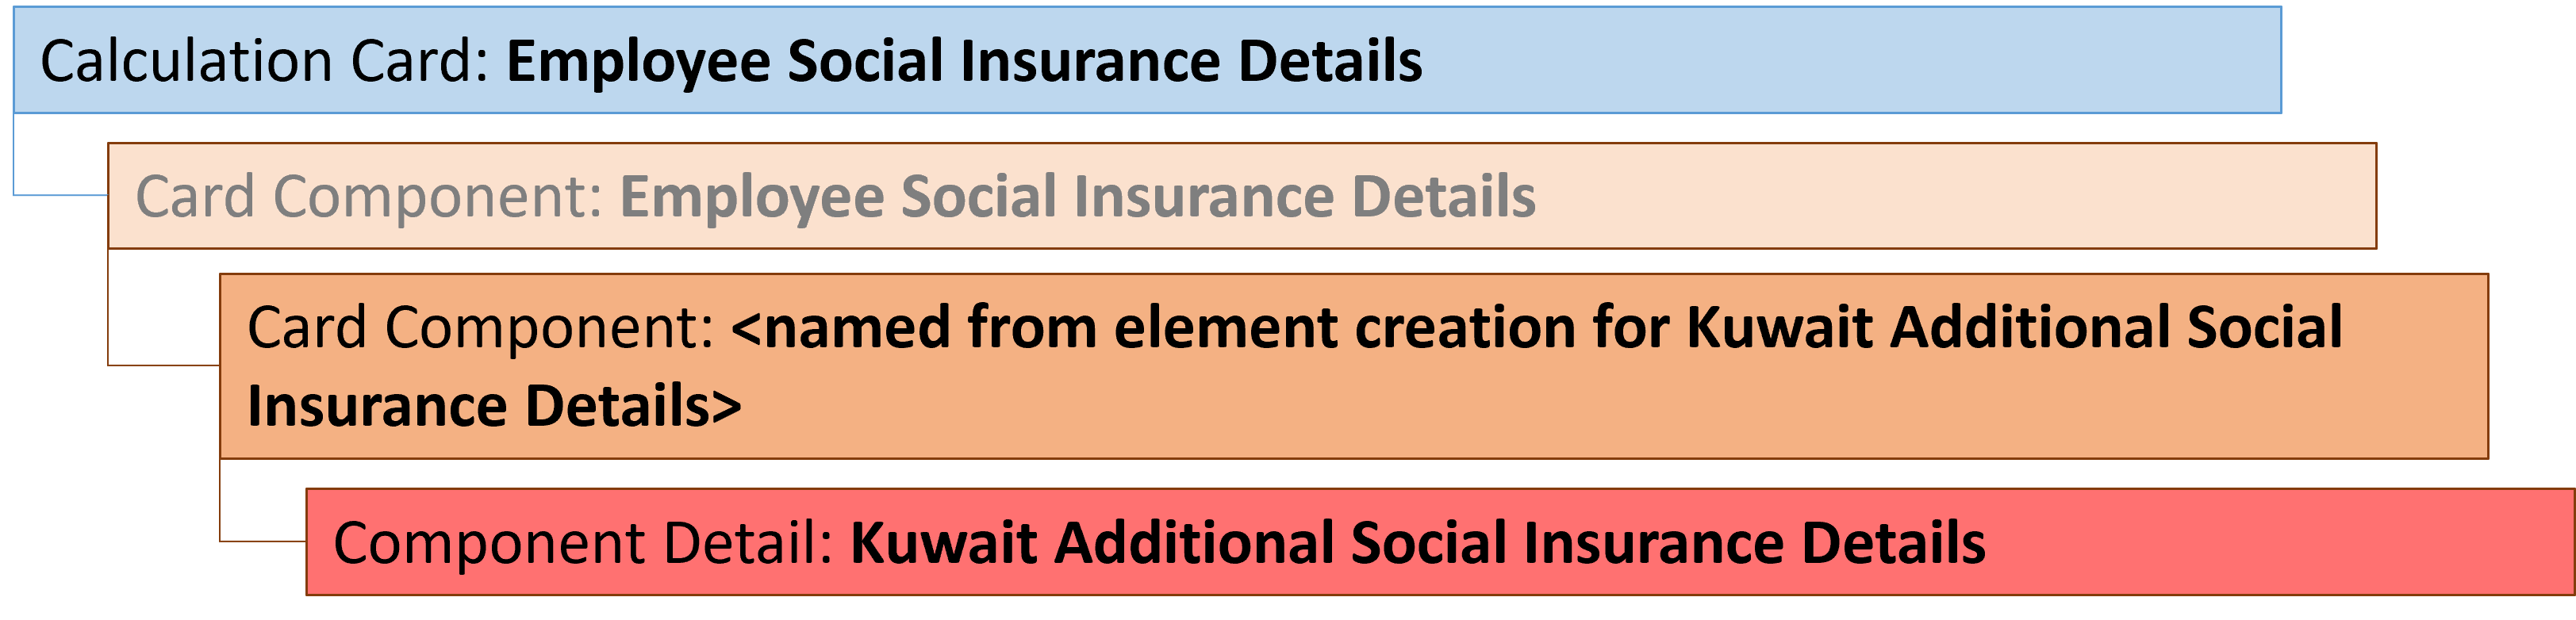 kw employee social insurance details kuwait additional card component